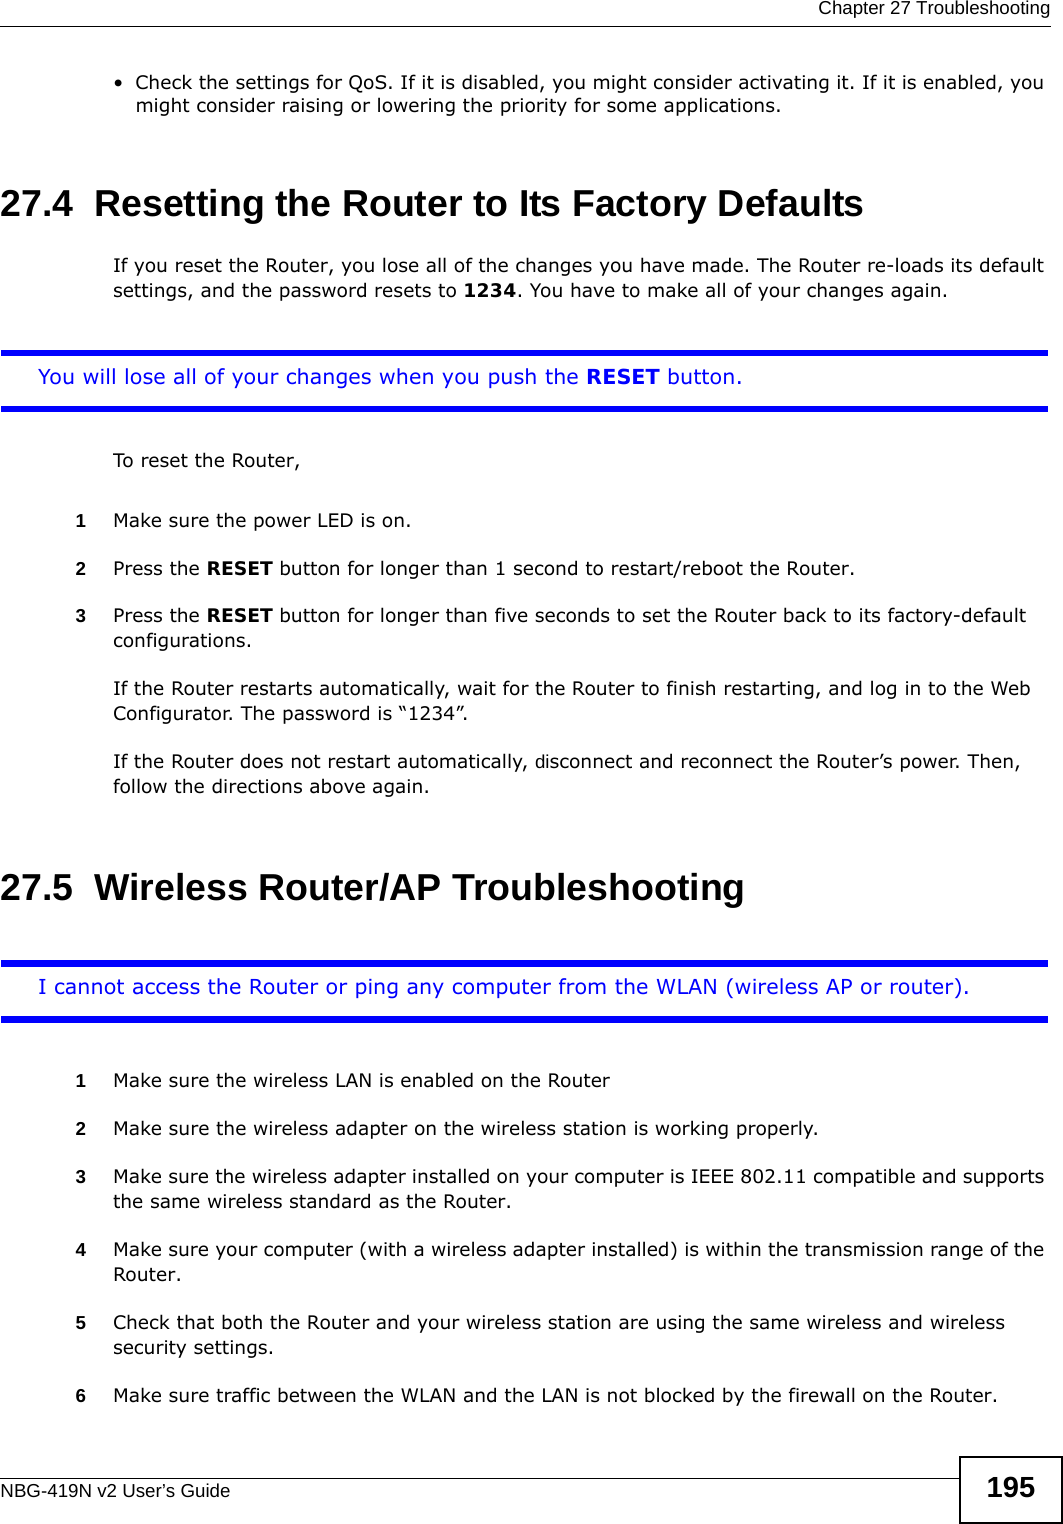  Chapter 27 TroubleshootingNBG-419N v2 User’s Guide 195• Check the settings for QoS. If it is disabled, you might consider activating it. If it is enabled, you might consider raising or lowering the priority for some applications.27.4  Resetting the Router to Its Factory Defaults If you reset the Router, you lose all of the changes you have made. The Router re-loads its default settings, and the password resets to 1234. You have to make all of your changes again.You will lose all of your changes when you push the RESET button.To reset the Router,1Make sure the power LED is on.2Press the RESET button for longer than 1 second to restart/reboot the Router.3Press the RESET button for longer than five seconds to set the Router back to its factory-default configurations.If the Router restarts automatically, wait for the Router to finish restarting, and log in to the Web Configurator. The password is “1234”.If the Router does not restart automatically, disconnect and reconnect the Router’s power. Then, follow the directions above again.27.5  Wireless Router/AP TroubleshootingI cannot access the Router or ping any computer from the WLAN (wireless AP or router).1Make sure the wireless LAN is enabled on the Router2Make sure the wireless adapter on the wireless station is working properly.3Make sure the wireless adapter installed on your computer is IEEE 802.11 compatible and supports the same wireless standard as the Router.4Make sure your computer (with a wireless adapter installed) is within the transmission range of the Router.5Check that both the Router and your wireless station are using the same wireless and wireless security settings.6Make sure traffic between the WLAN and the LAN is not blocked by the firewall on the Router. 